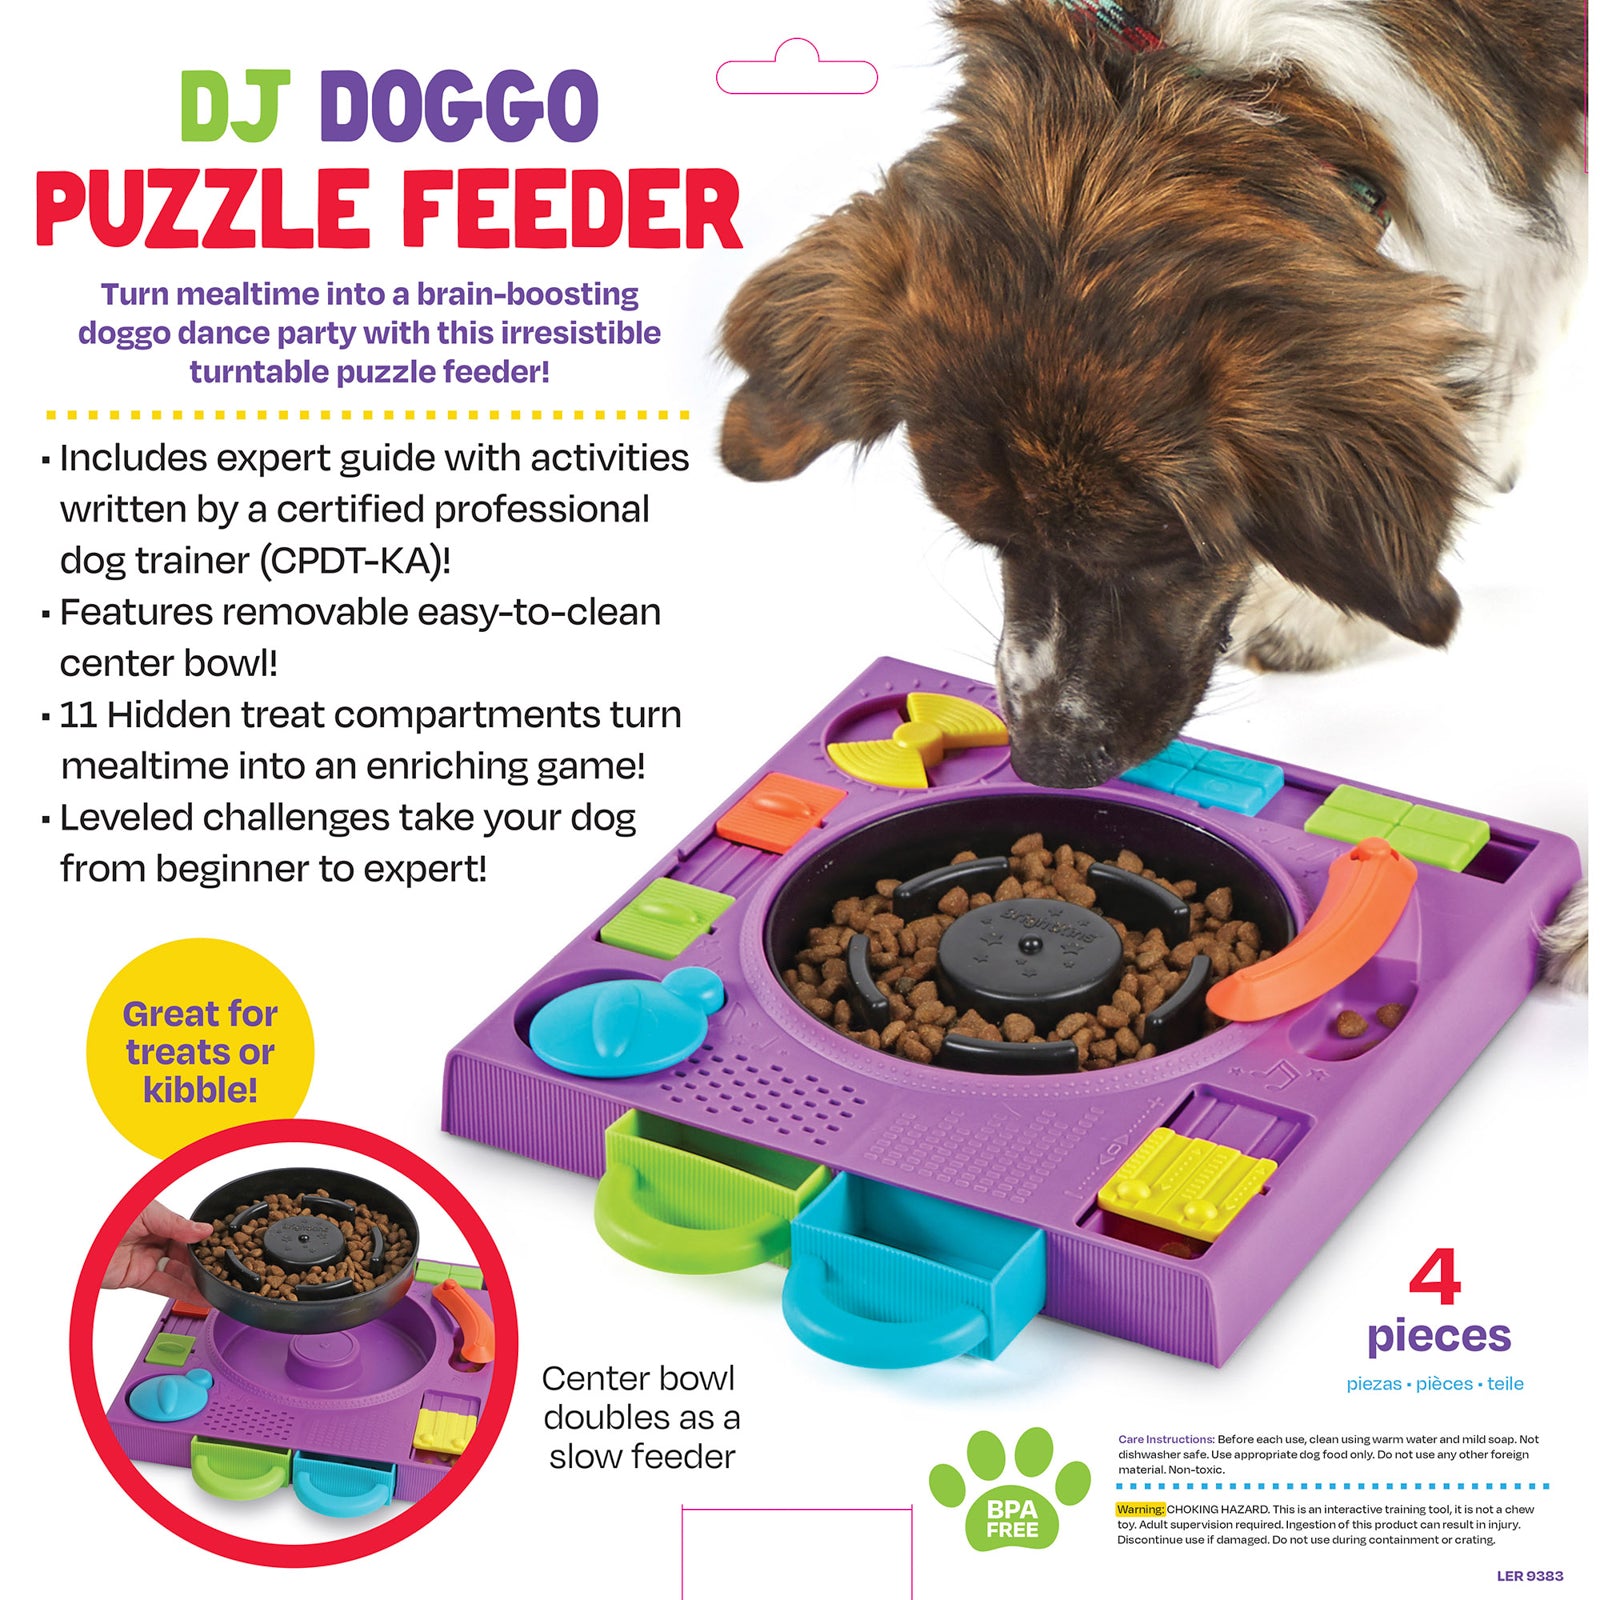 An infographic stating the benefits of a purple turntable style food puzzle for dogs